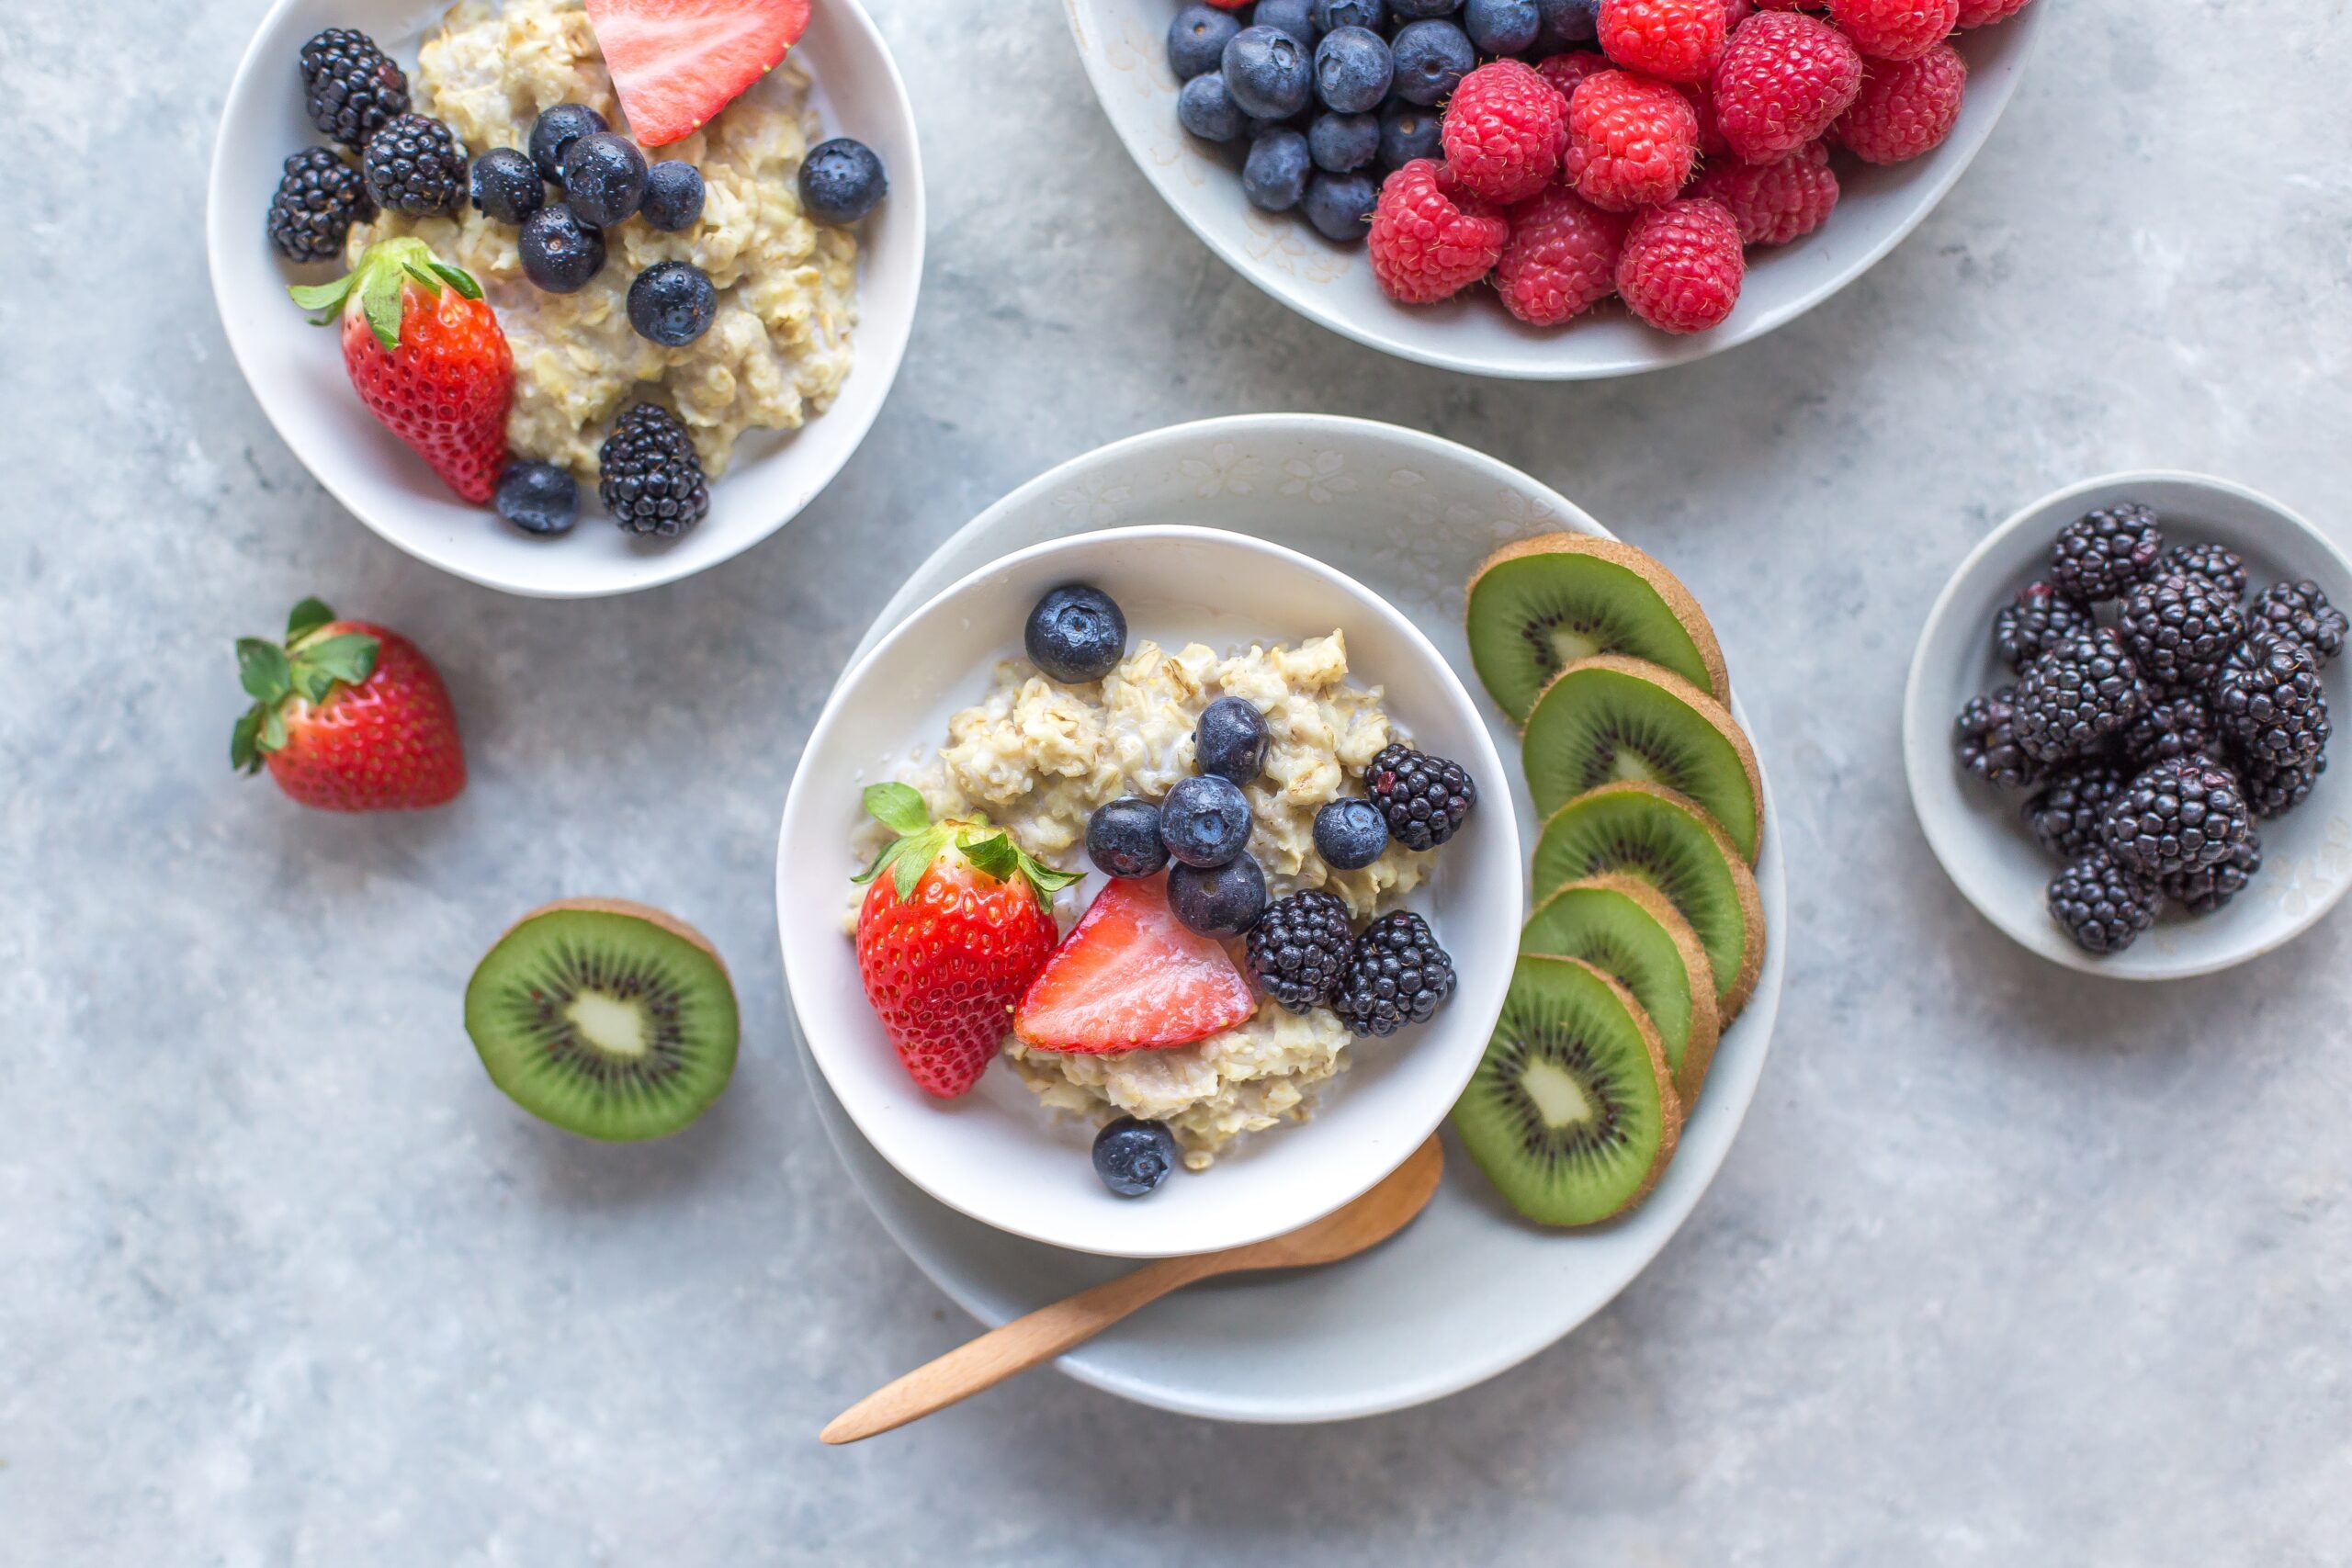 Two bowls of porridge, topped with lots of fruit like kiwis and berries